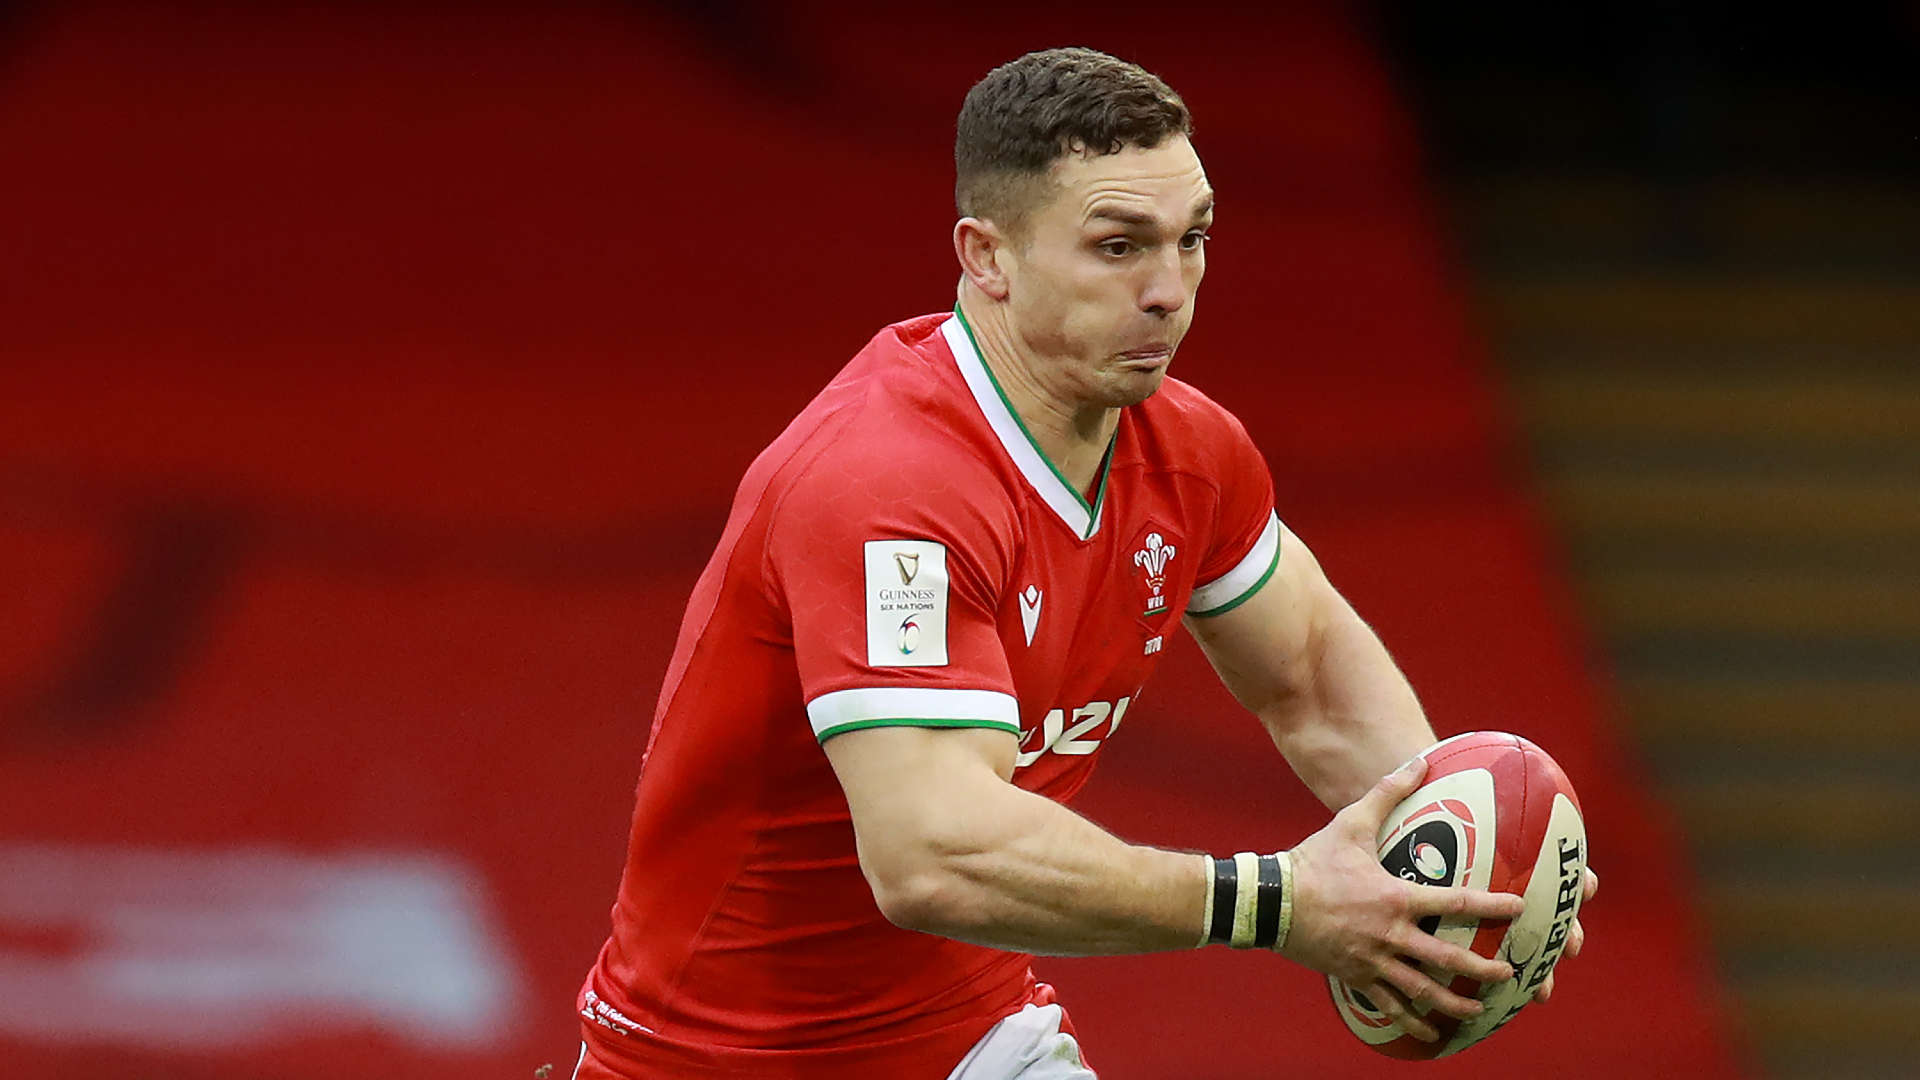 Wales will be out to make it three wins from three in the 2021 Six Nations when they face England on a milestone occasion for George North.